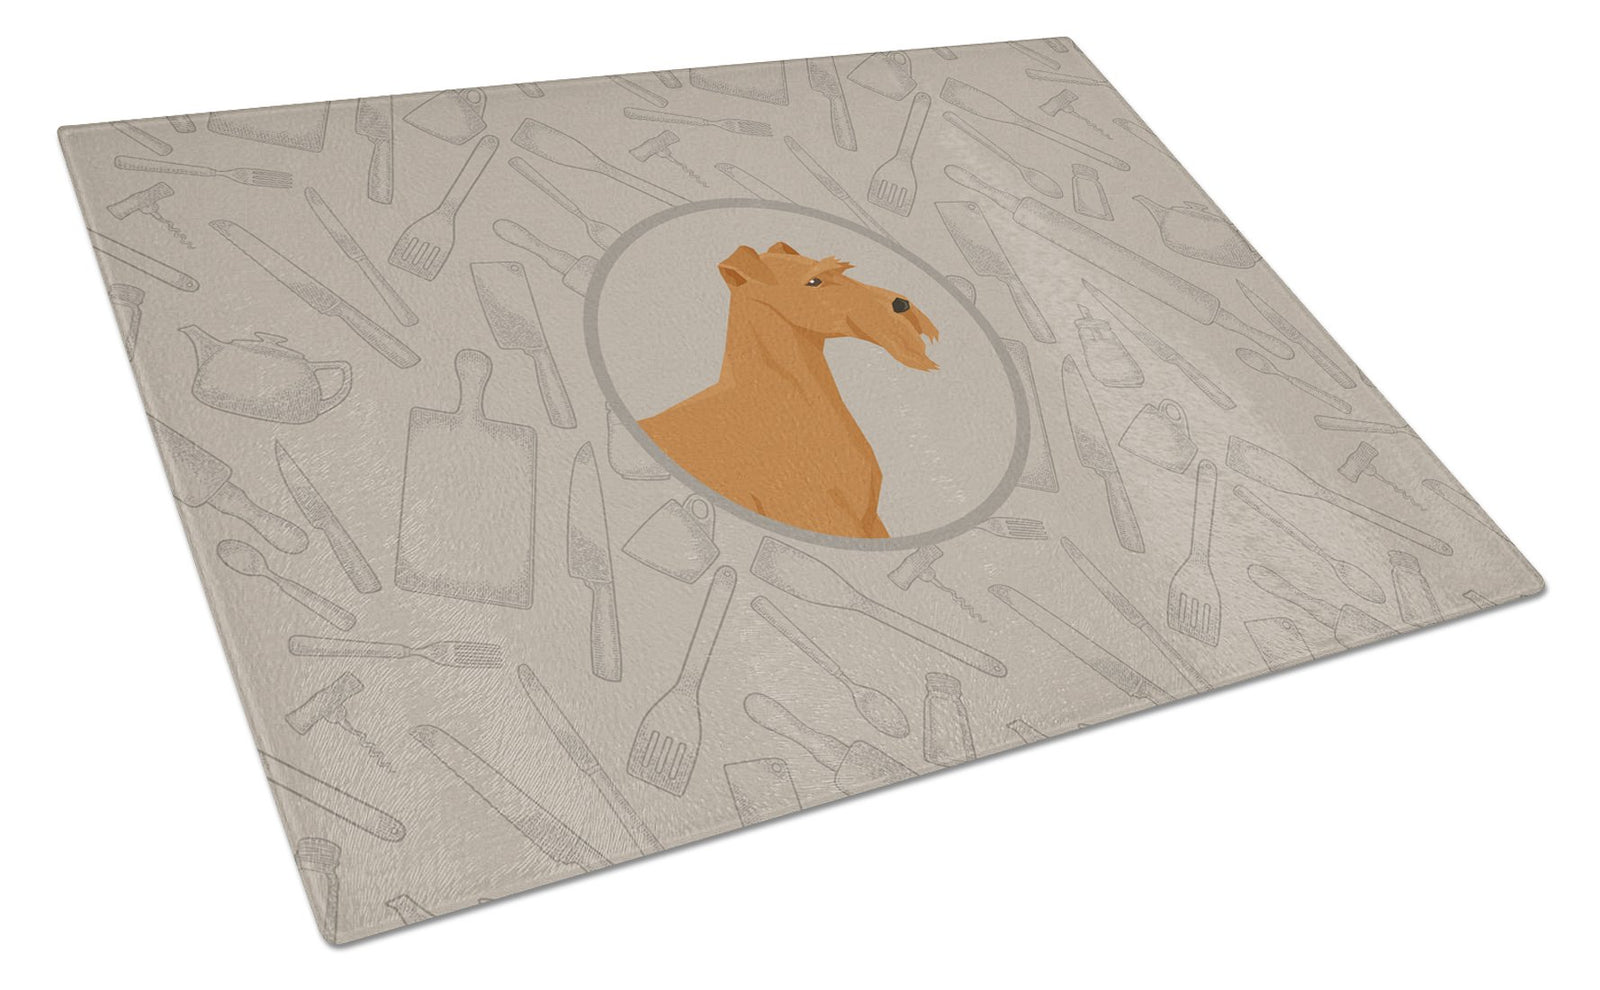 Irish Terrier In the Kitchen Glass Cutting Board Large CK2193LCB by Caroline's Treasures